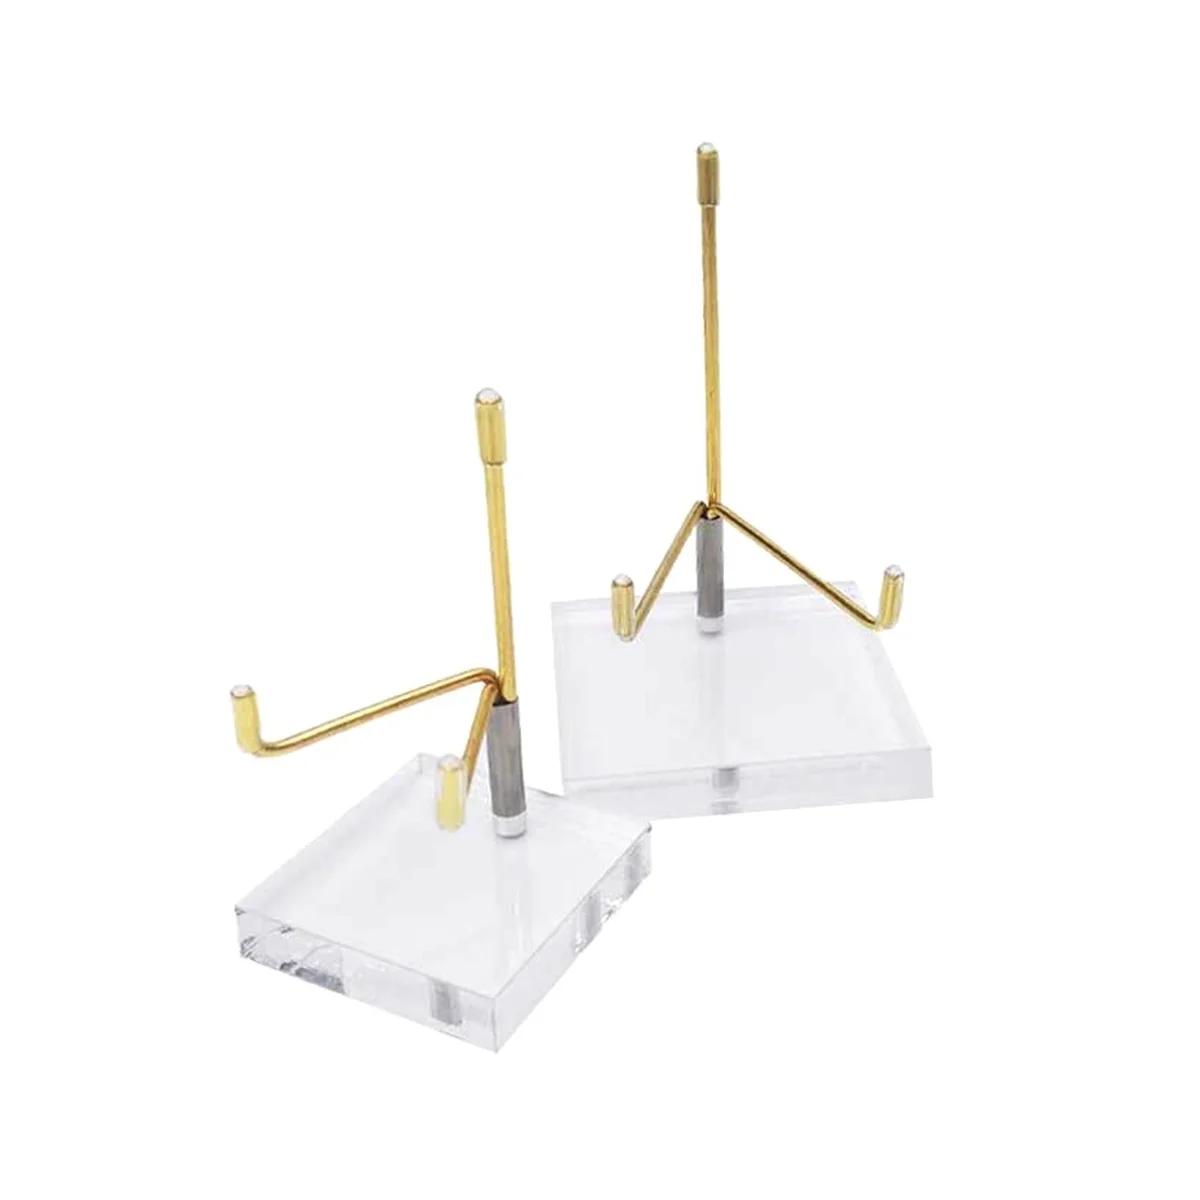 

2 Pcs Adjustable Metal Arm Display Stand Easel with Clear Acrylic Base for Gemstones Crystal Mineral Plates